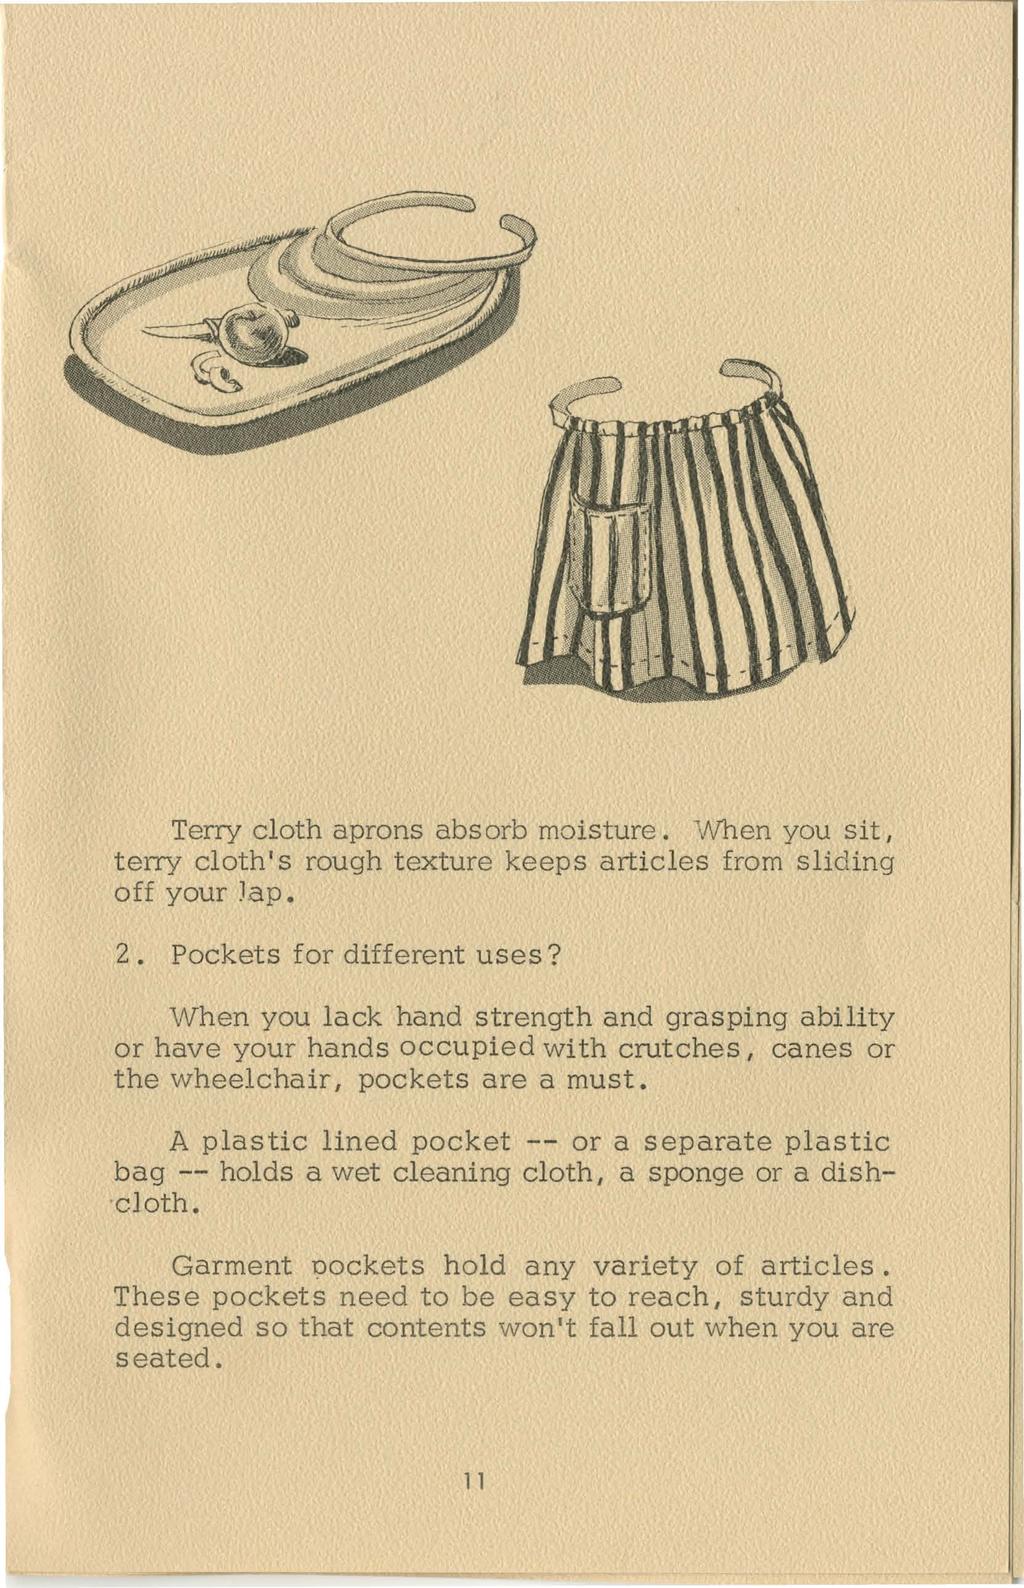 Terry cloth aprons absorb moisture. 'v'vhen you sit, terry cloth's rough texture keeps articles from sliding off your Jap. 2. Pockets for different uses?